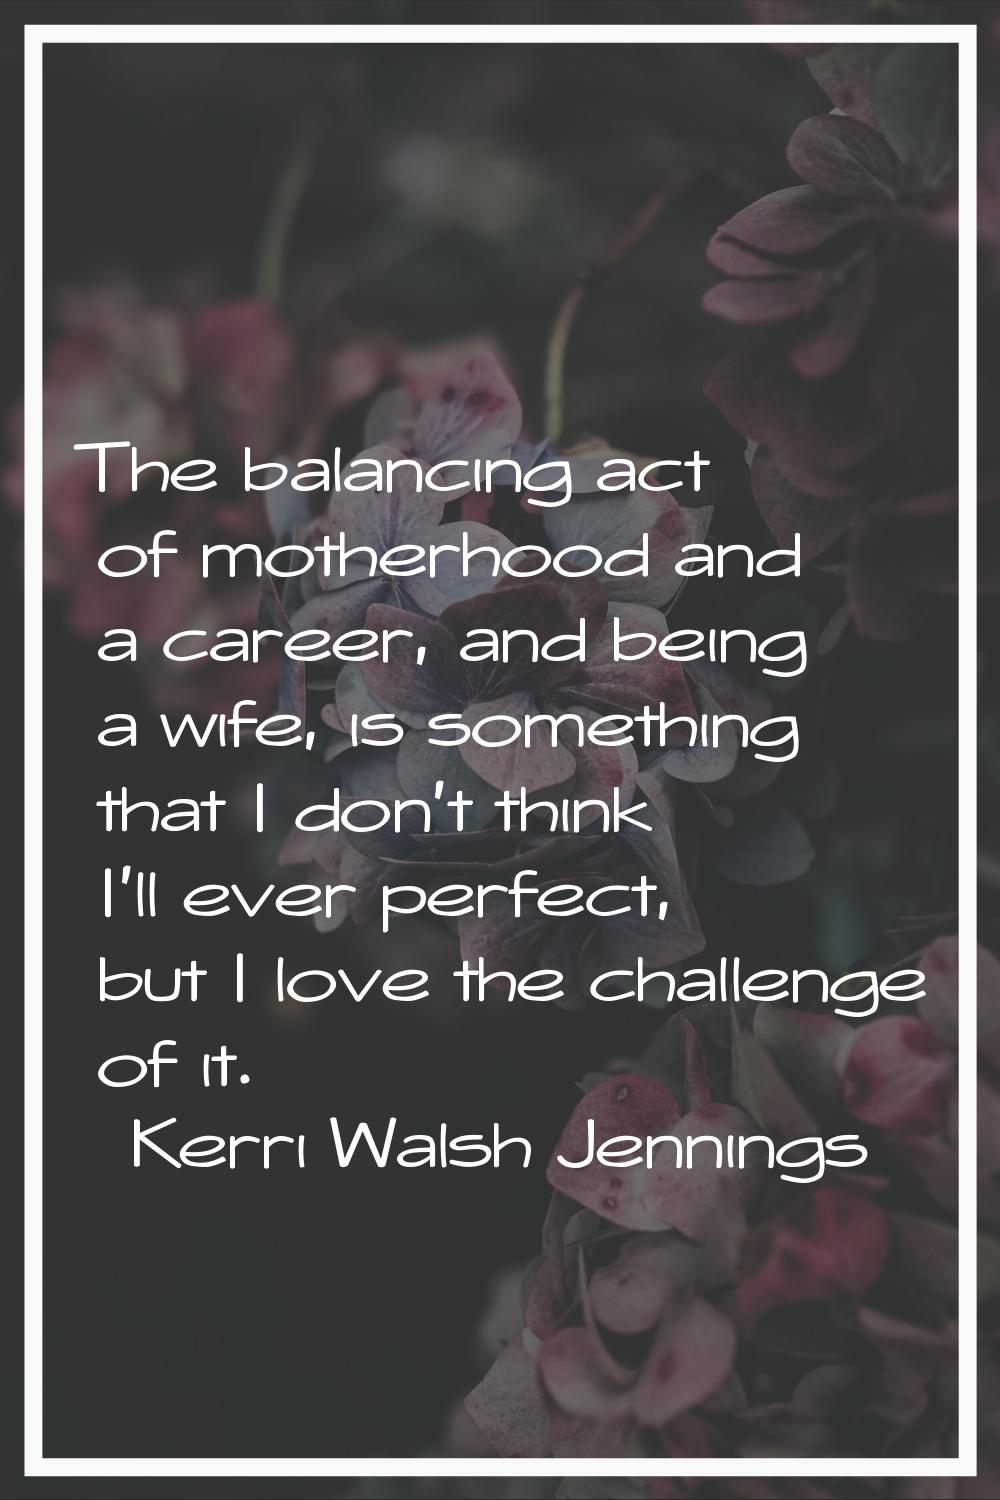 The balancing act of motherhood and a career, and being a wife, is something that I don't think I'l